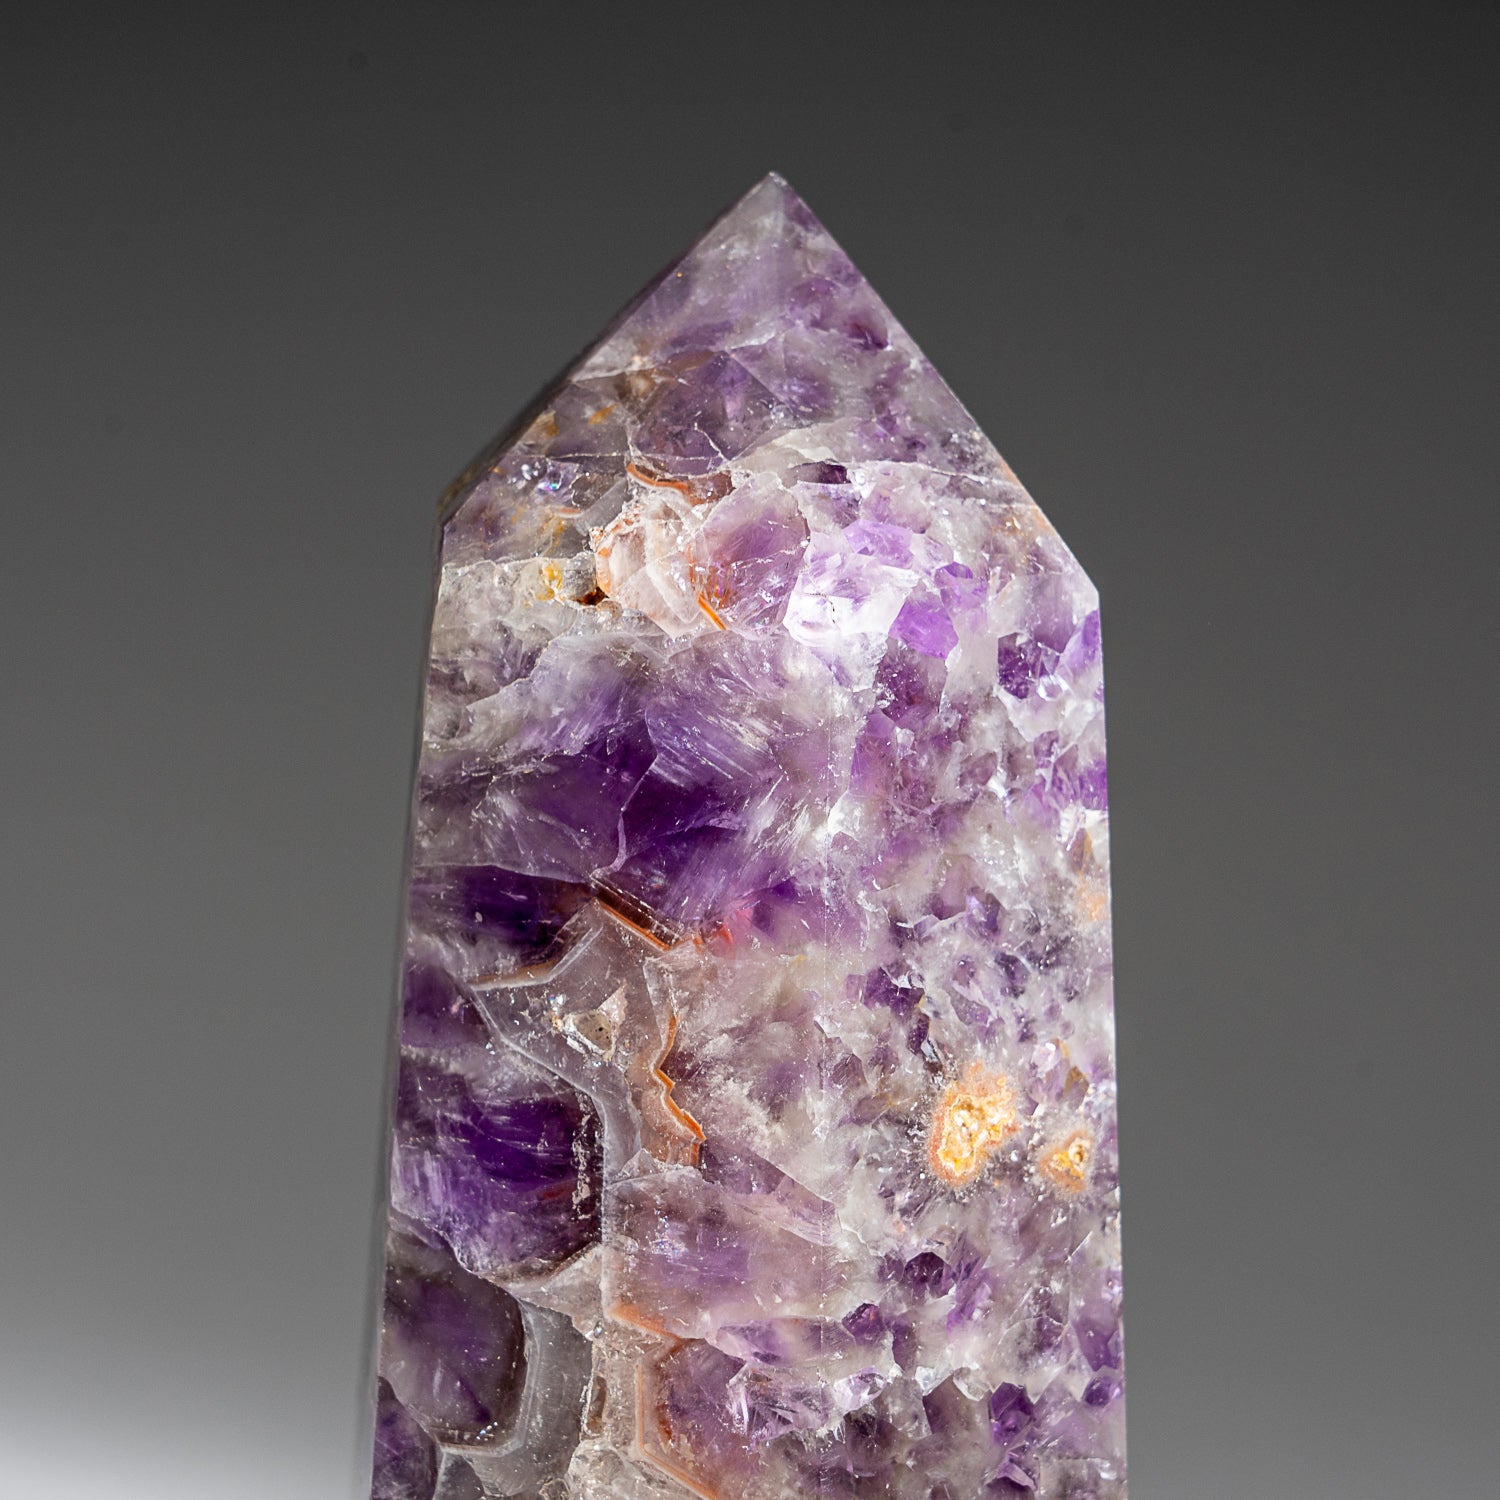 Polished Amethyst Crystal Point From Brazil (2.6 lbs)